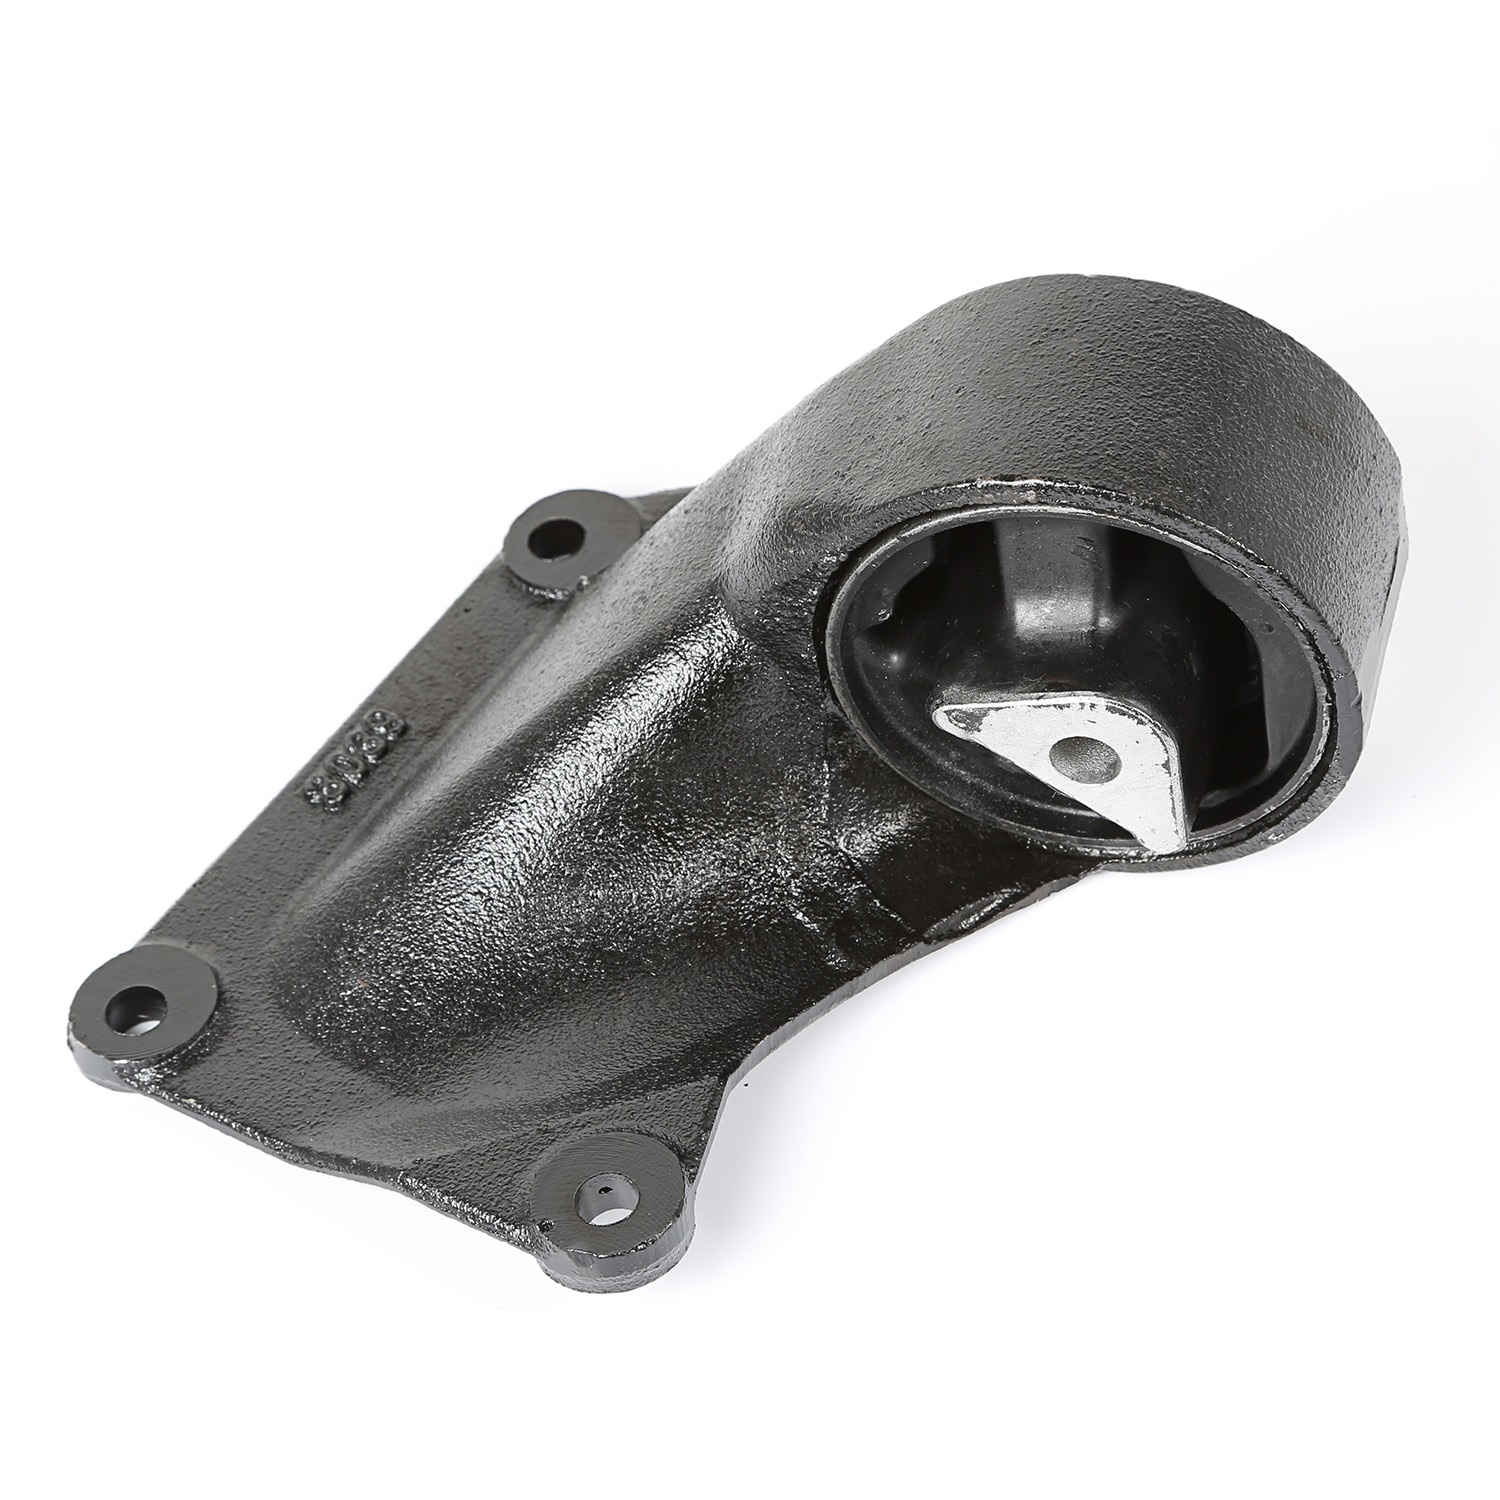 Omix This Right Front Engine Mount From Omix Fits 4.0L Engines Found In 99-04 Jeep Grand Cherokee.,